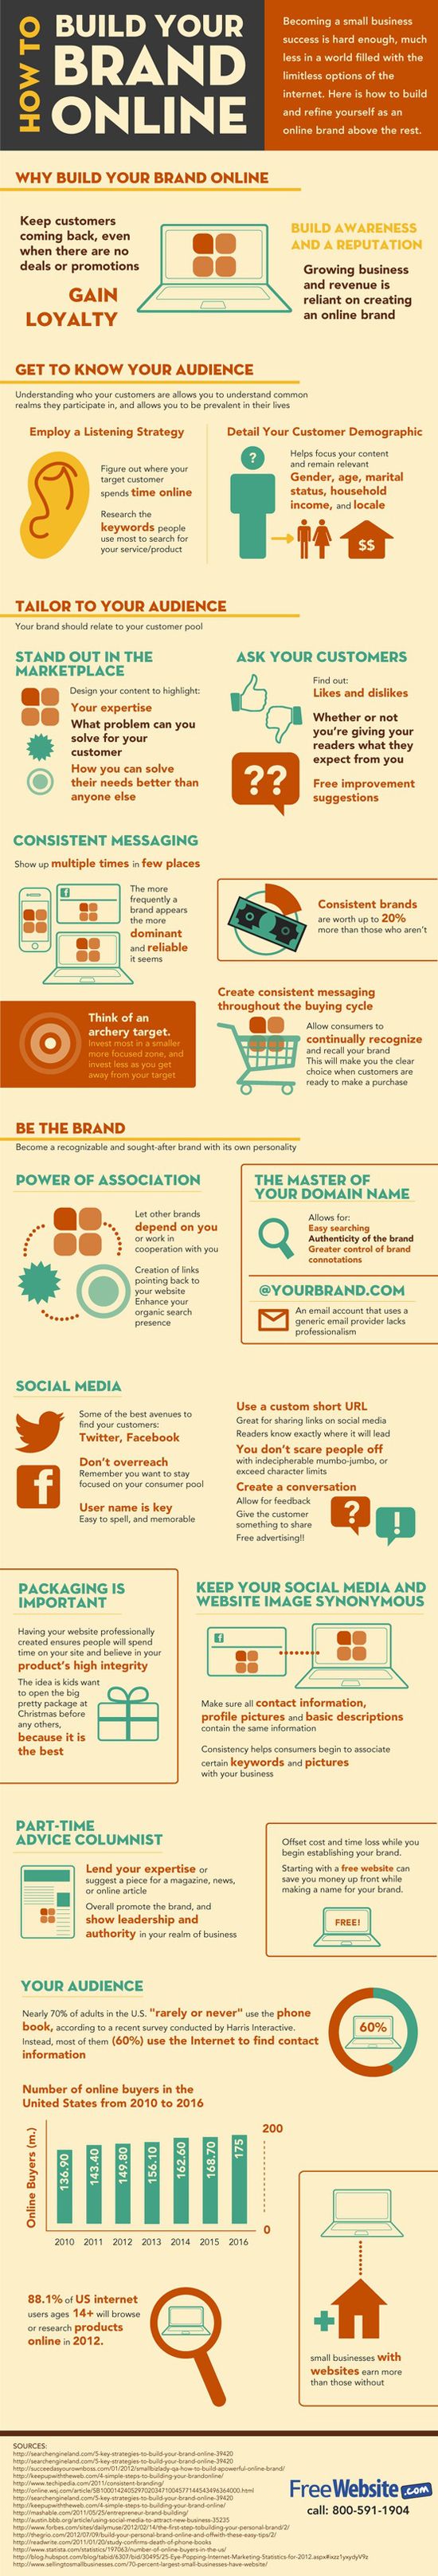 How to Build Your Brand Online  #infographic #branding